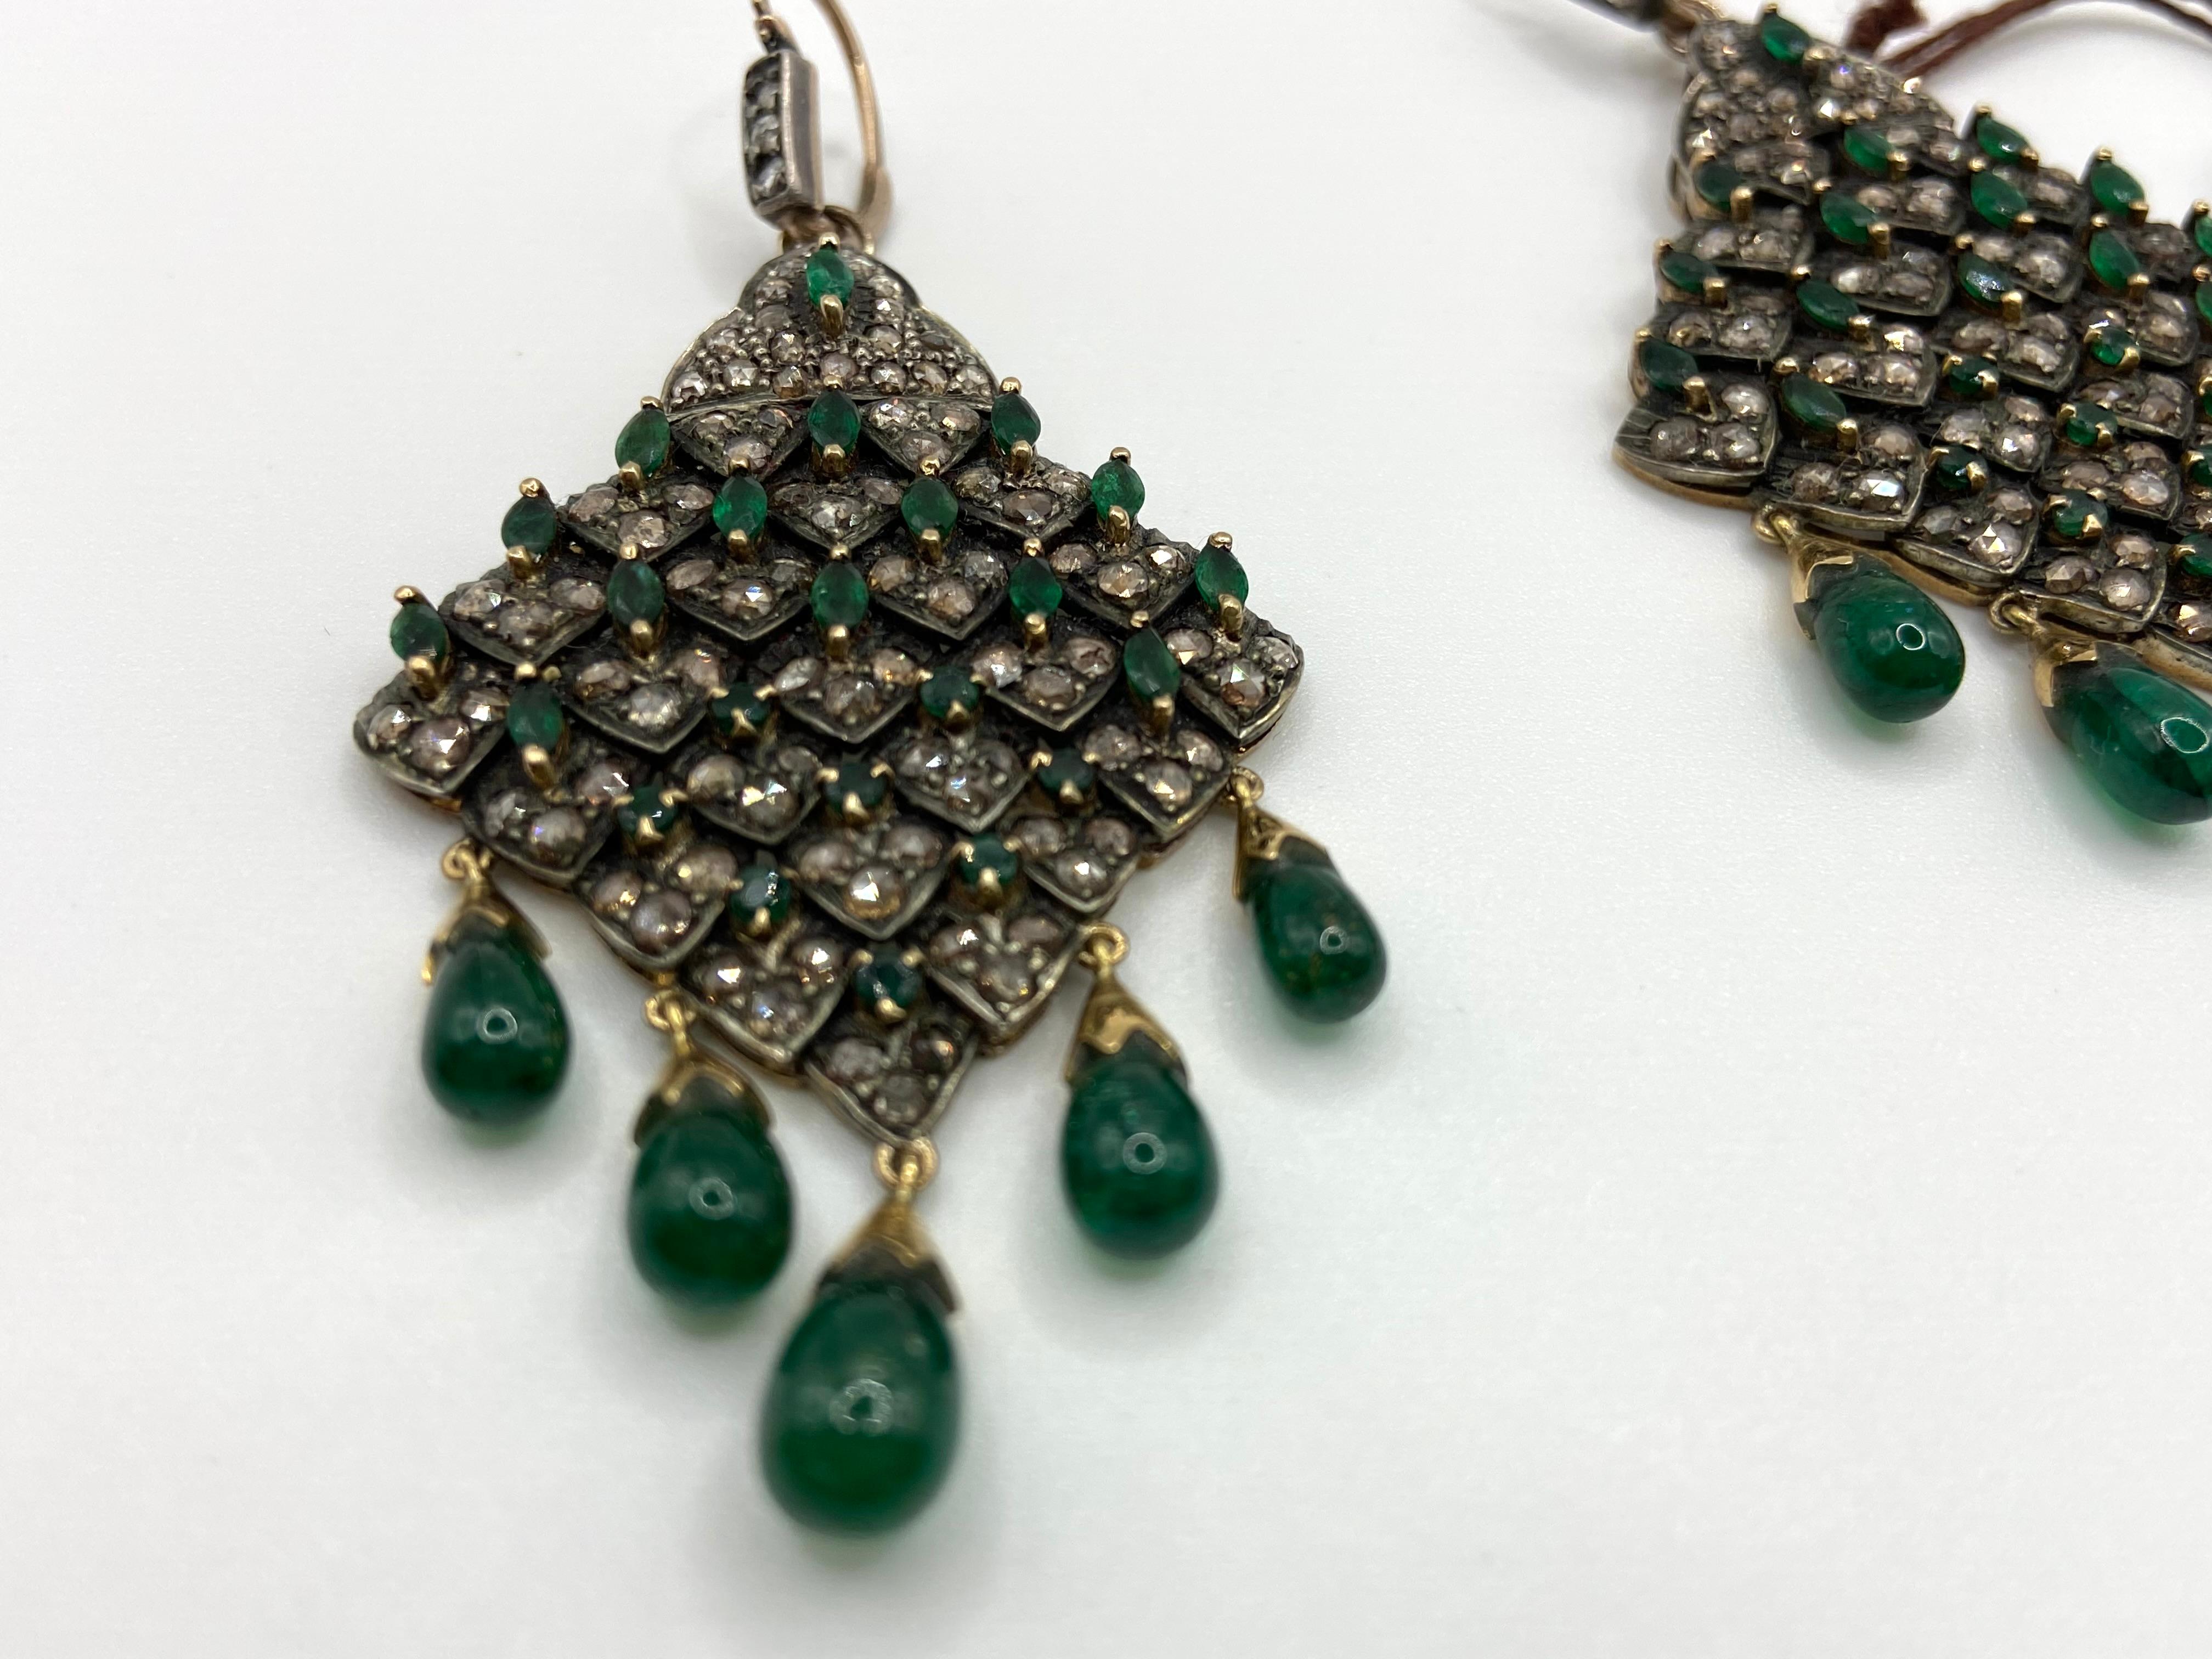 Antique Style Earrings 9Kt Gold, Diamonds, Emeralds, 1970s In Good Condition For Sale In Palermo, IT